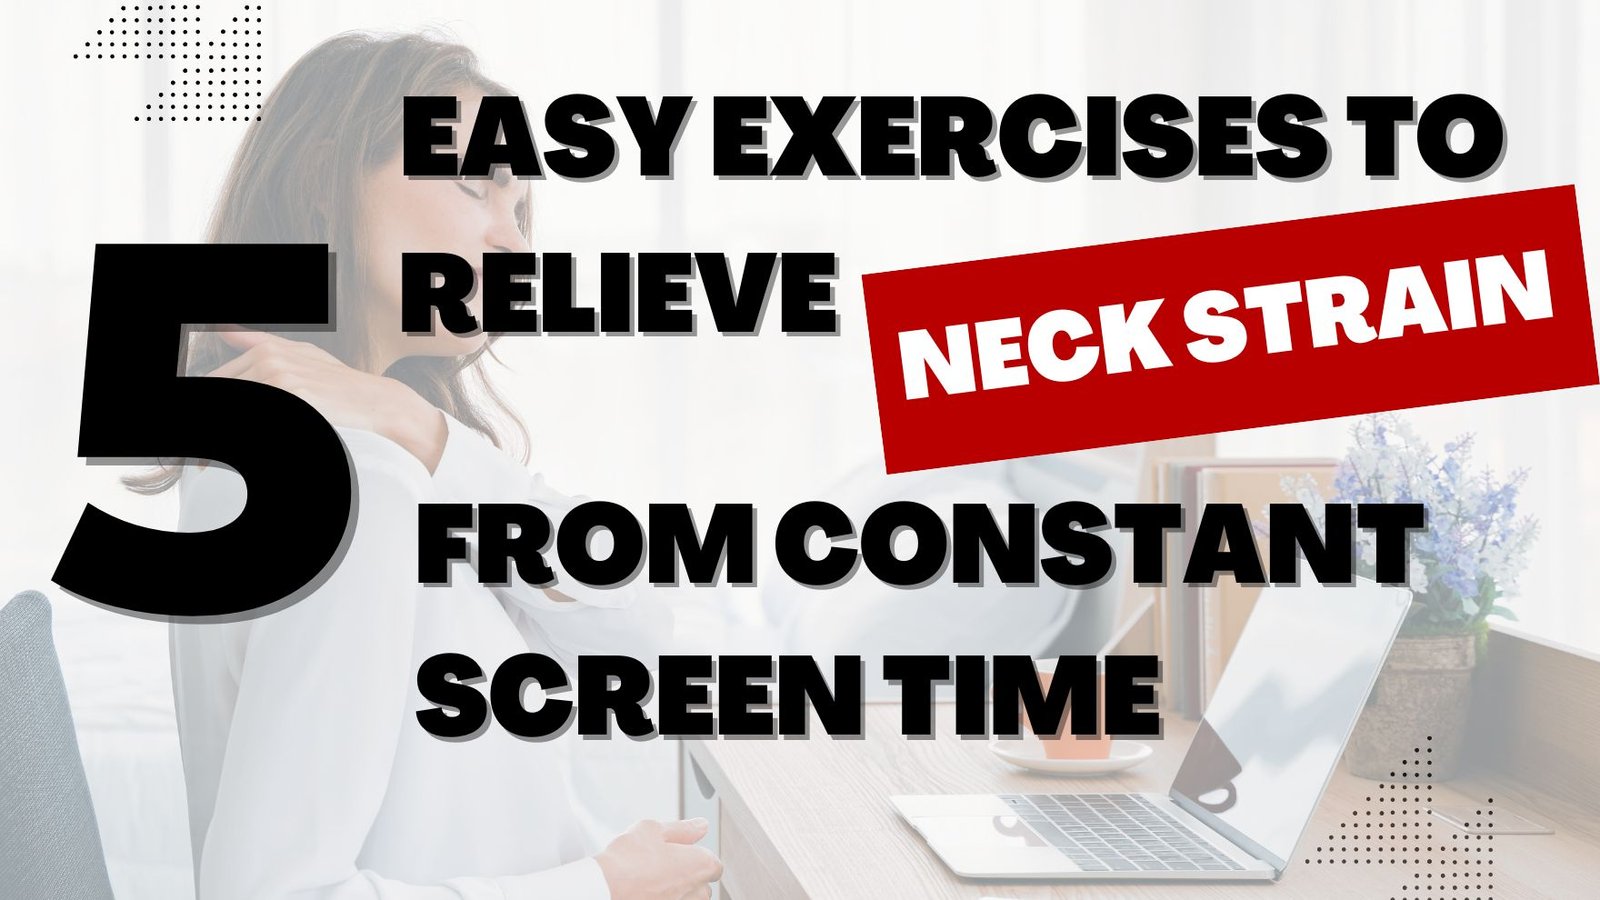 5 easy exercises to relieve neck strain from constant screen time